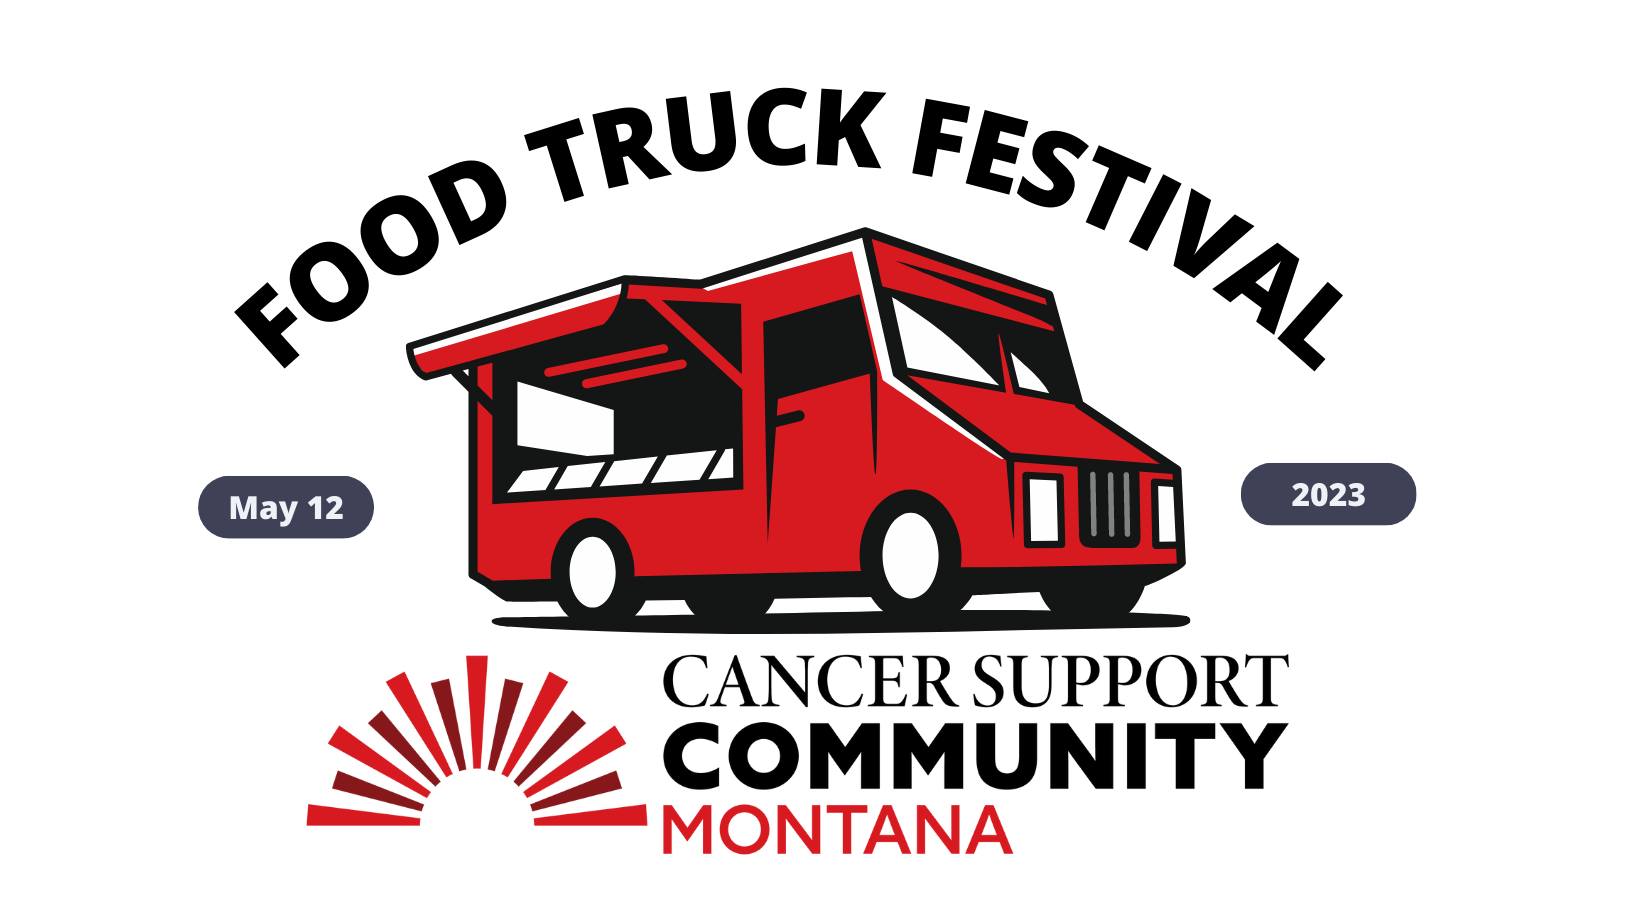 2nd Annual FOOD TRUCK FESTIVAL at Ogren Park Allegiance Field in Missoula, Montana on Friday, May 12, 2023